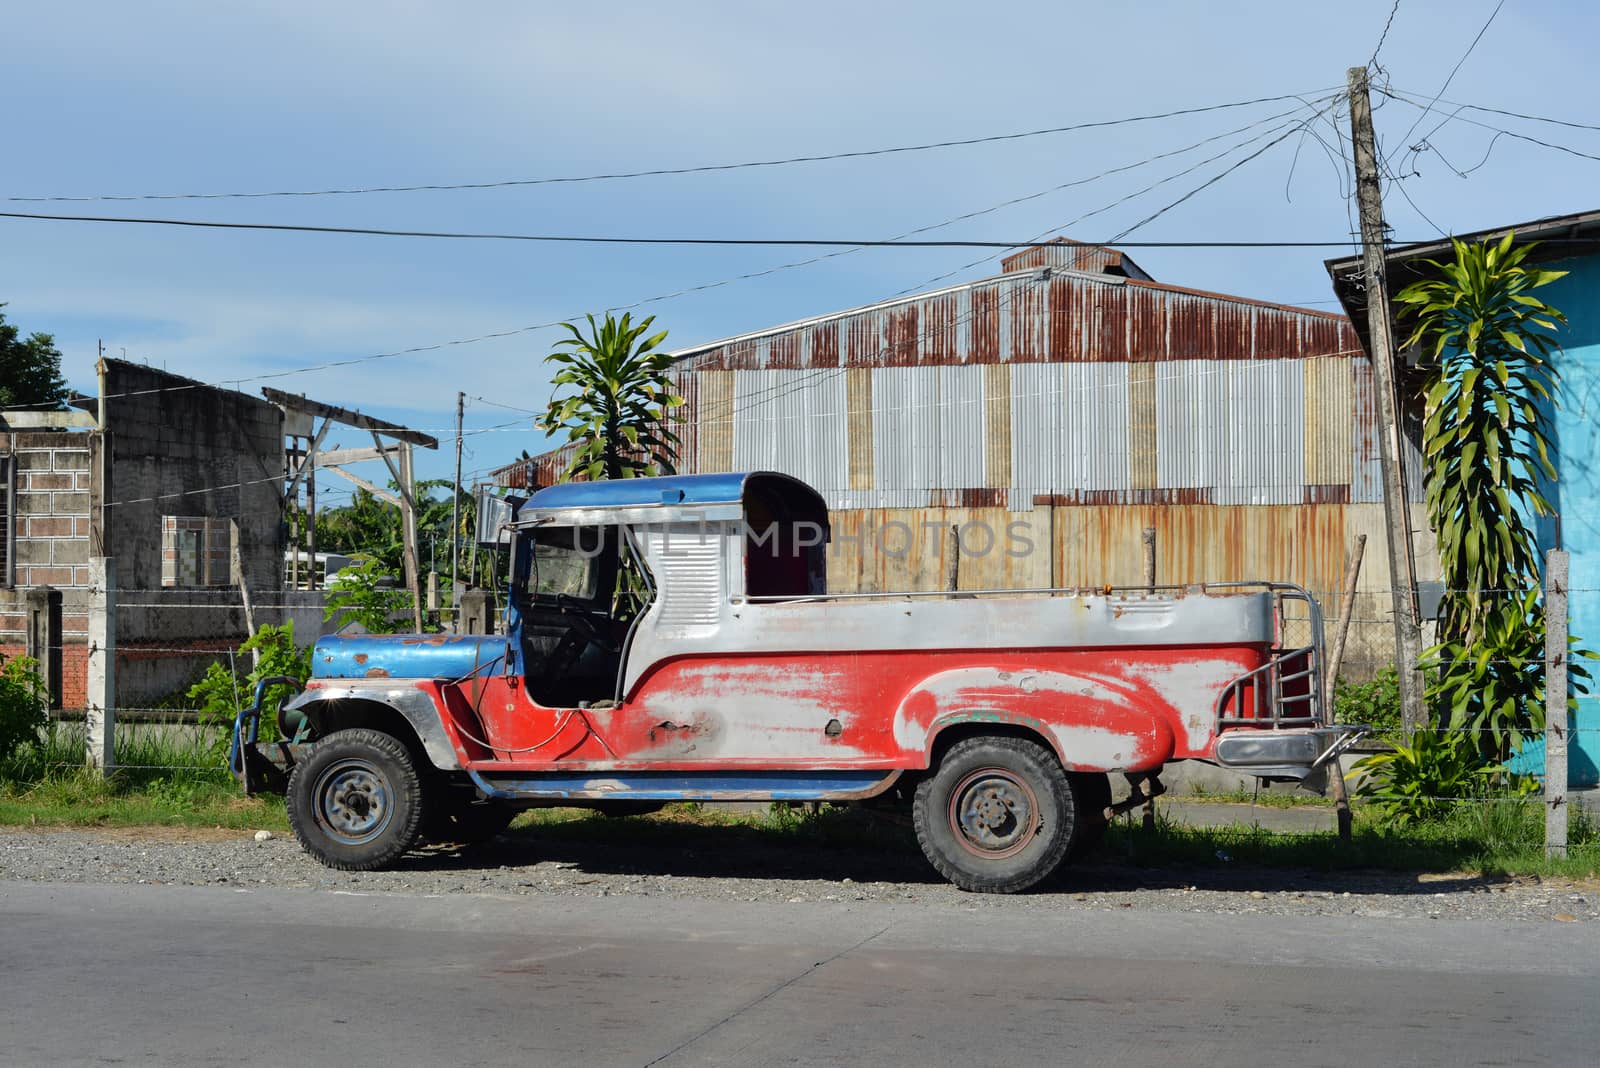 plain and undecorated jeepney in the Philippines